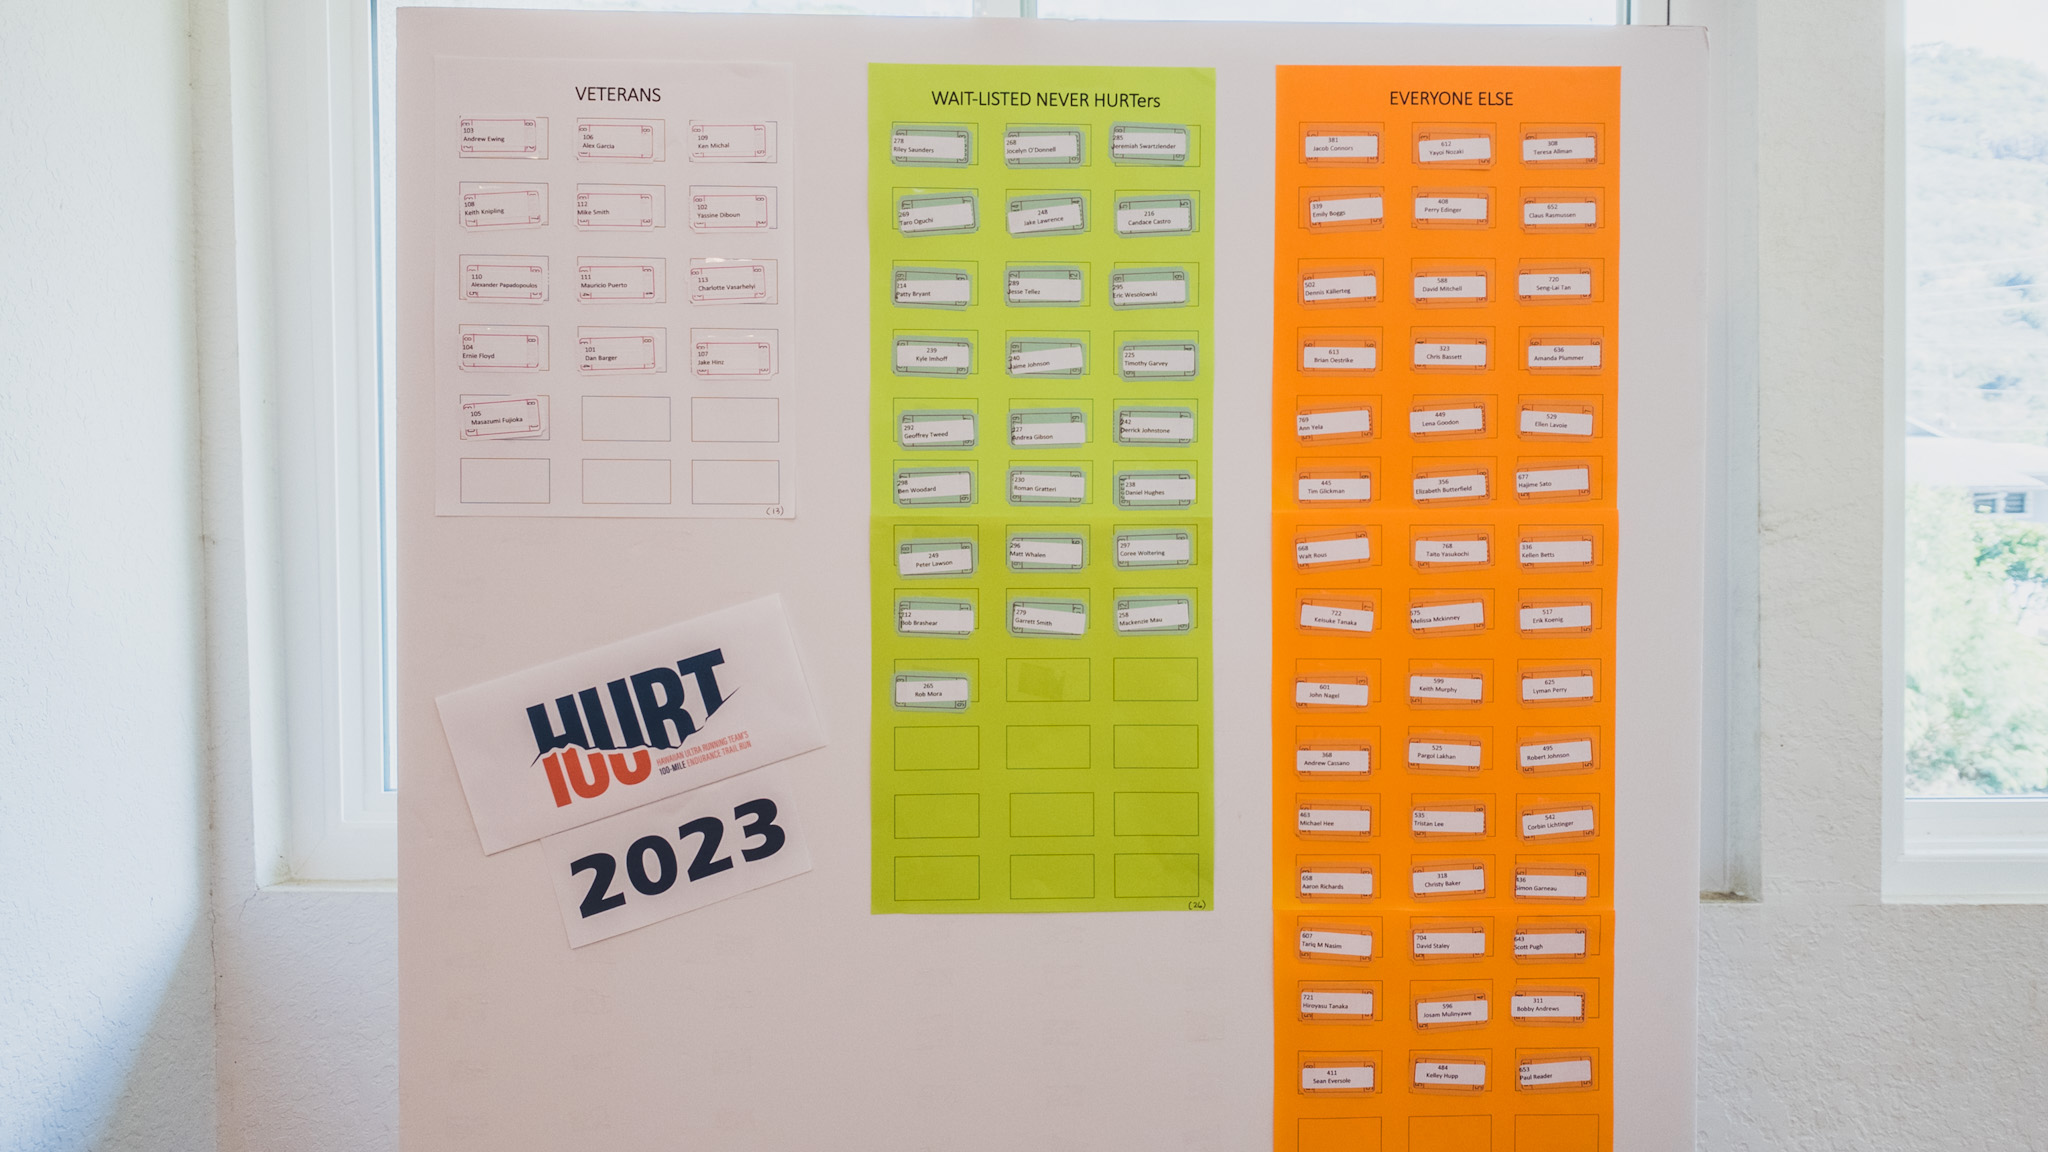 Lottery Results for HURT100 2023 HURT100